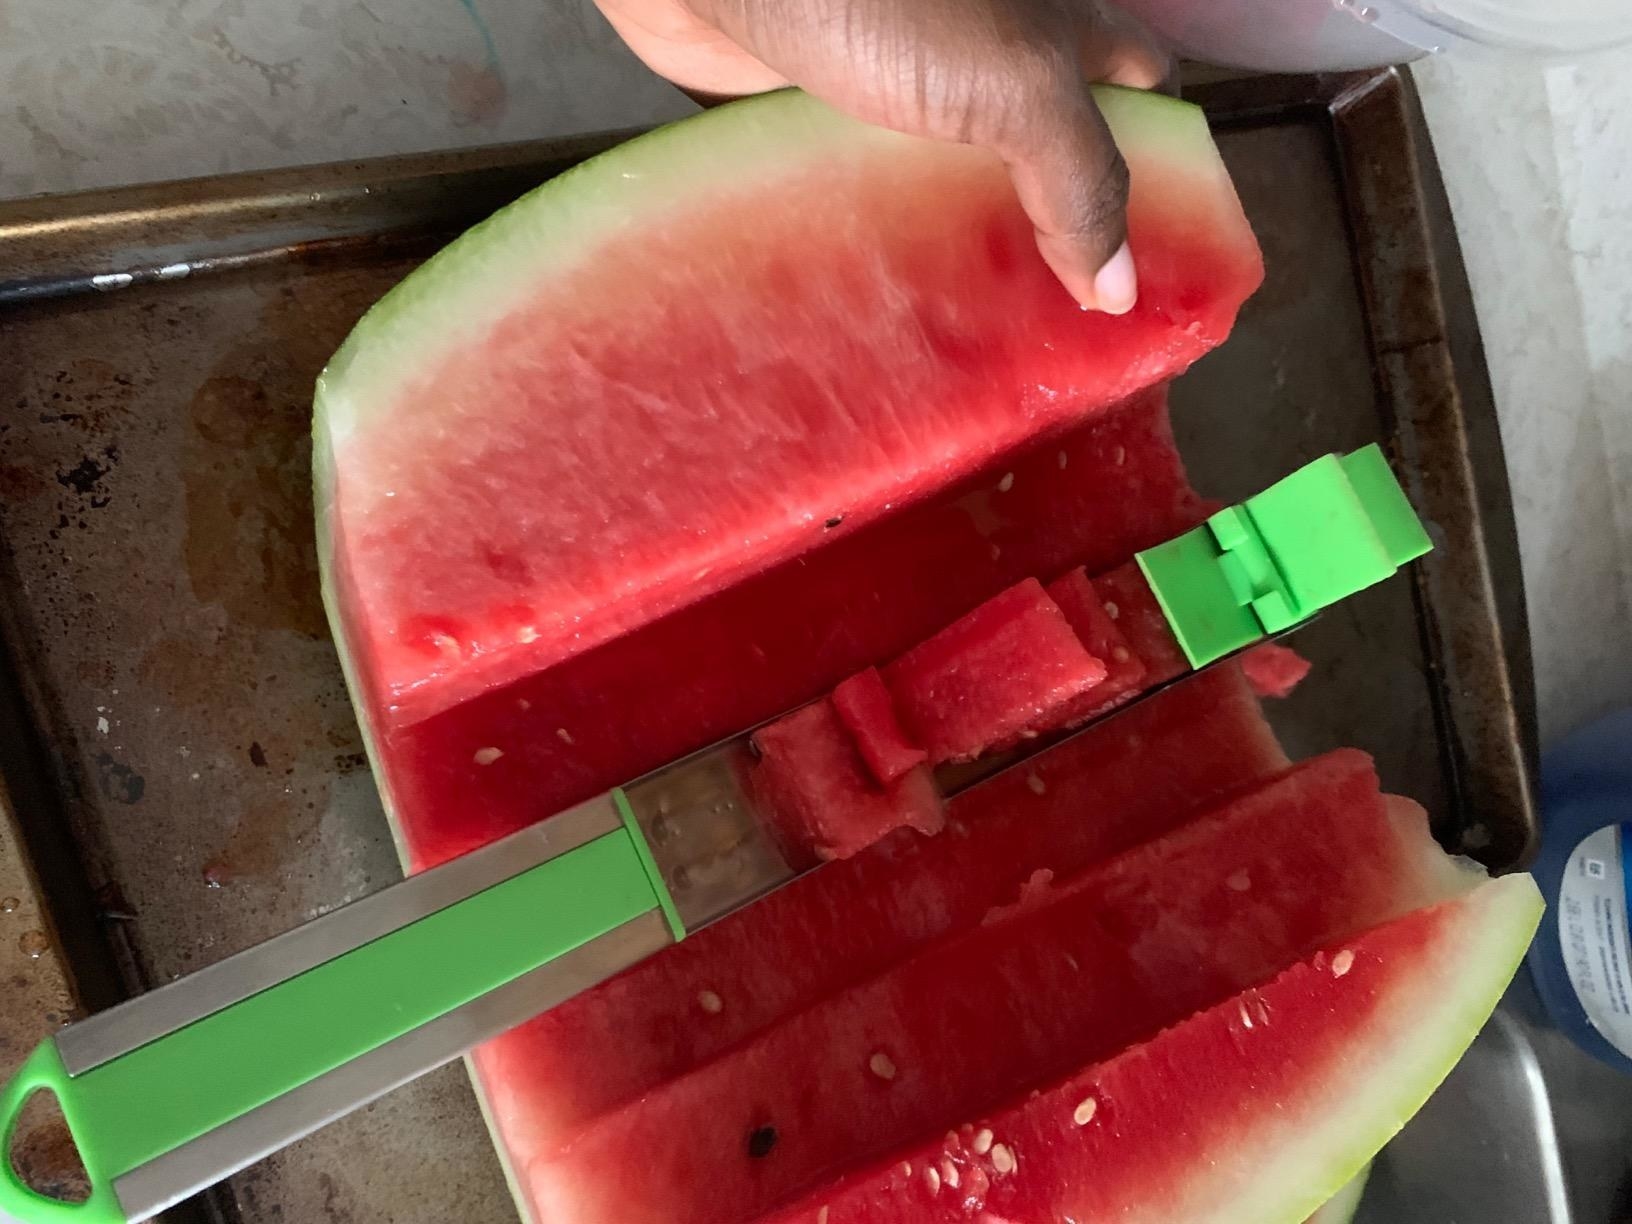 Reviewer showing tool being used to slice watermelon